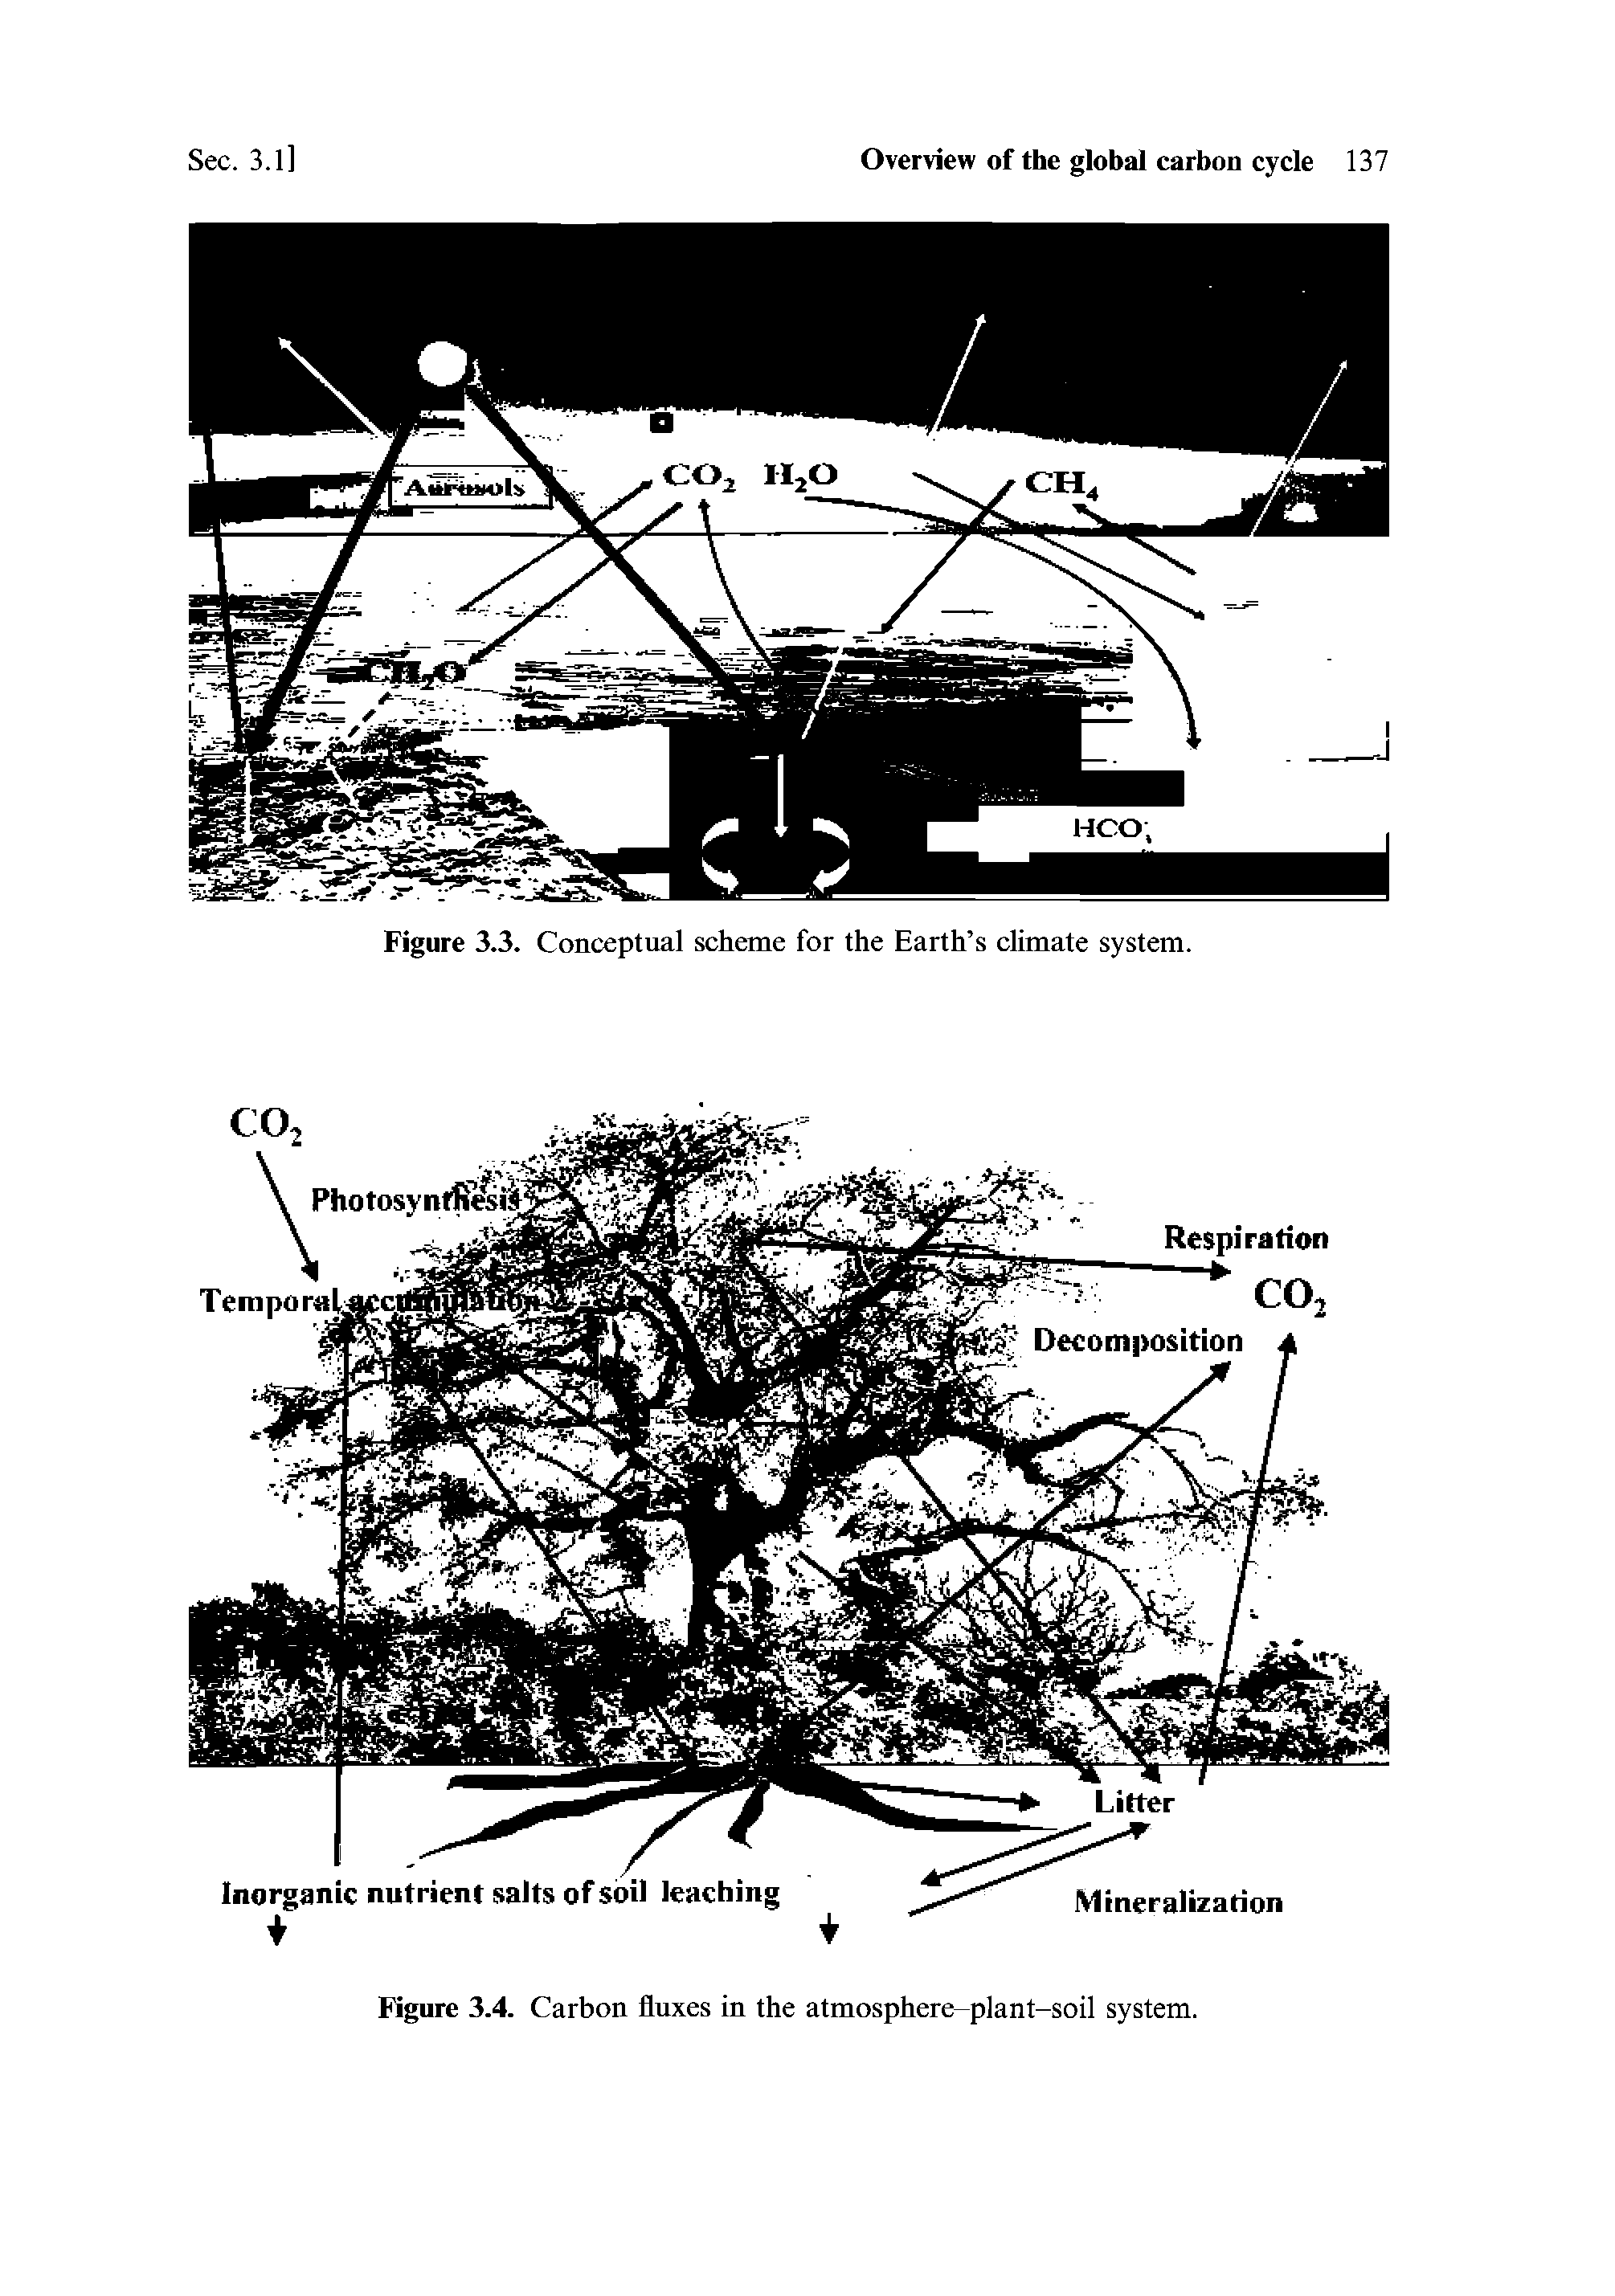 Figure 3.4. Carbon fluxes in the atmosphere-plant-soil system.